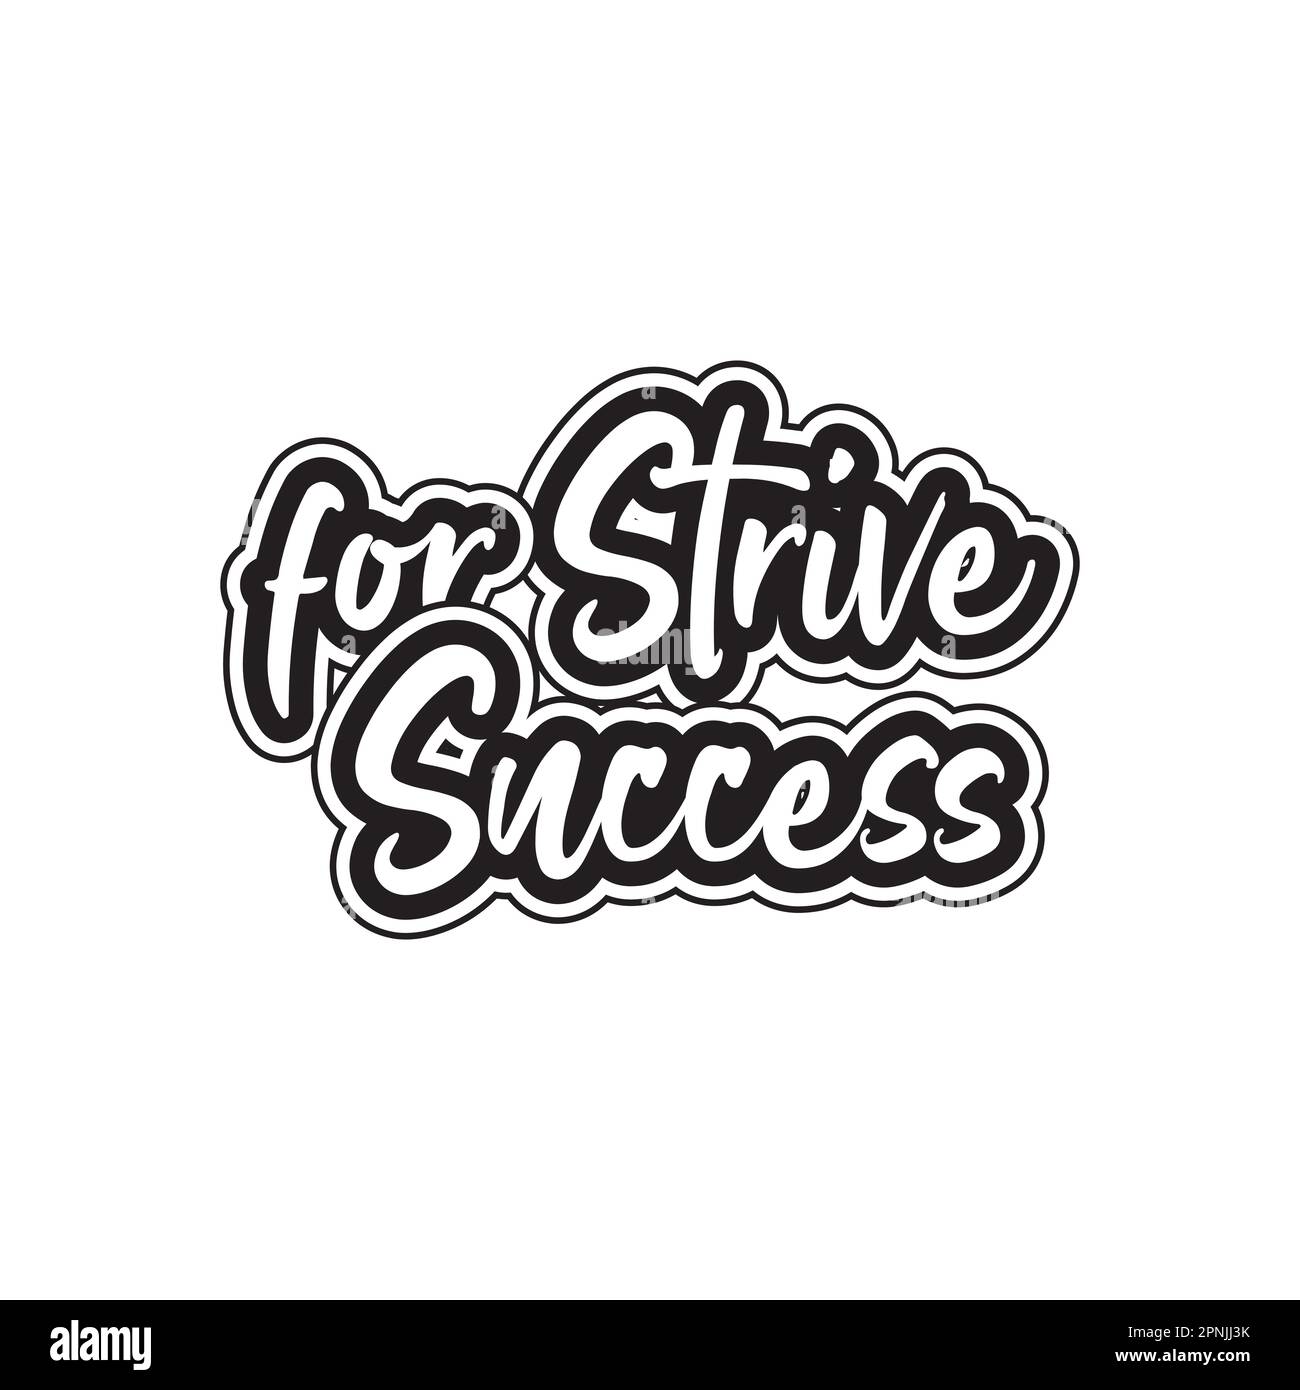 Strive for success motivational and inspirational lettering text typography t shirt design on white background Stock Vector